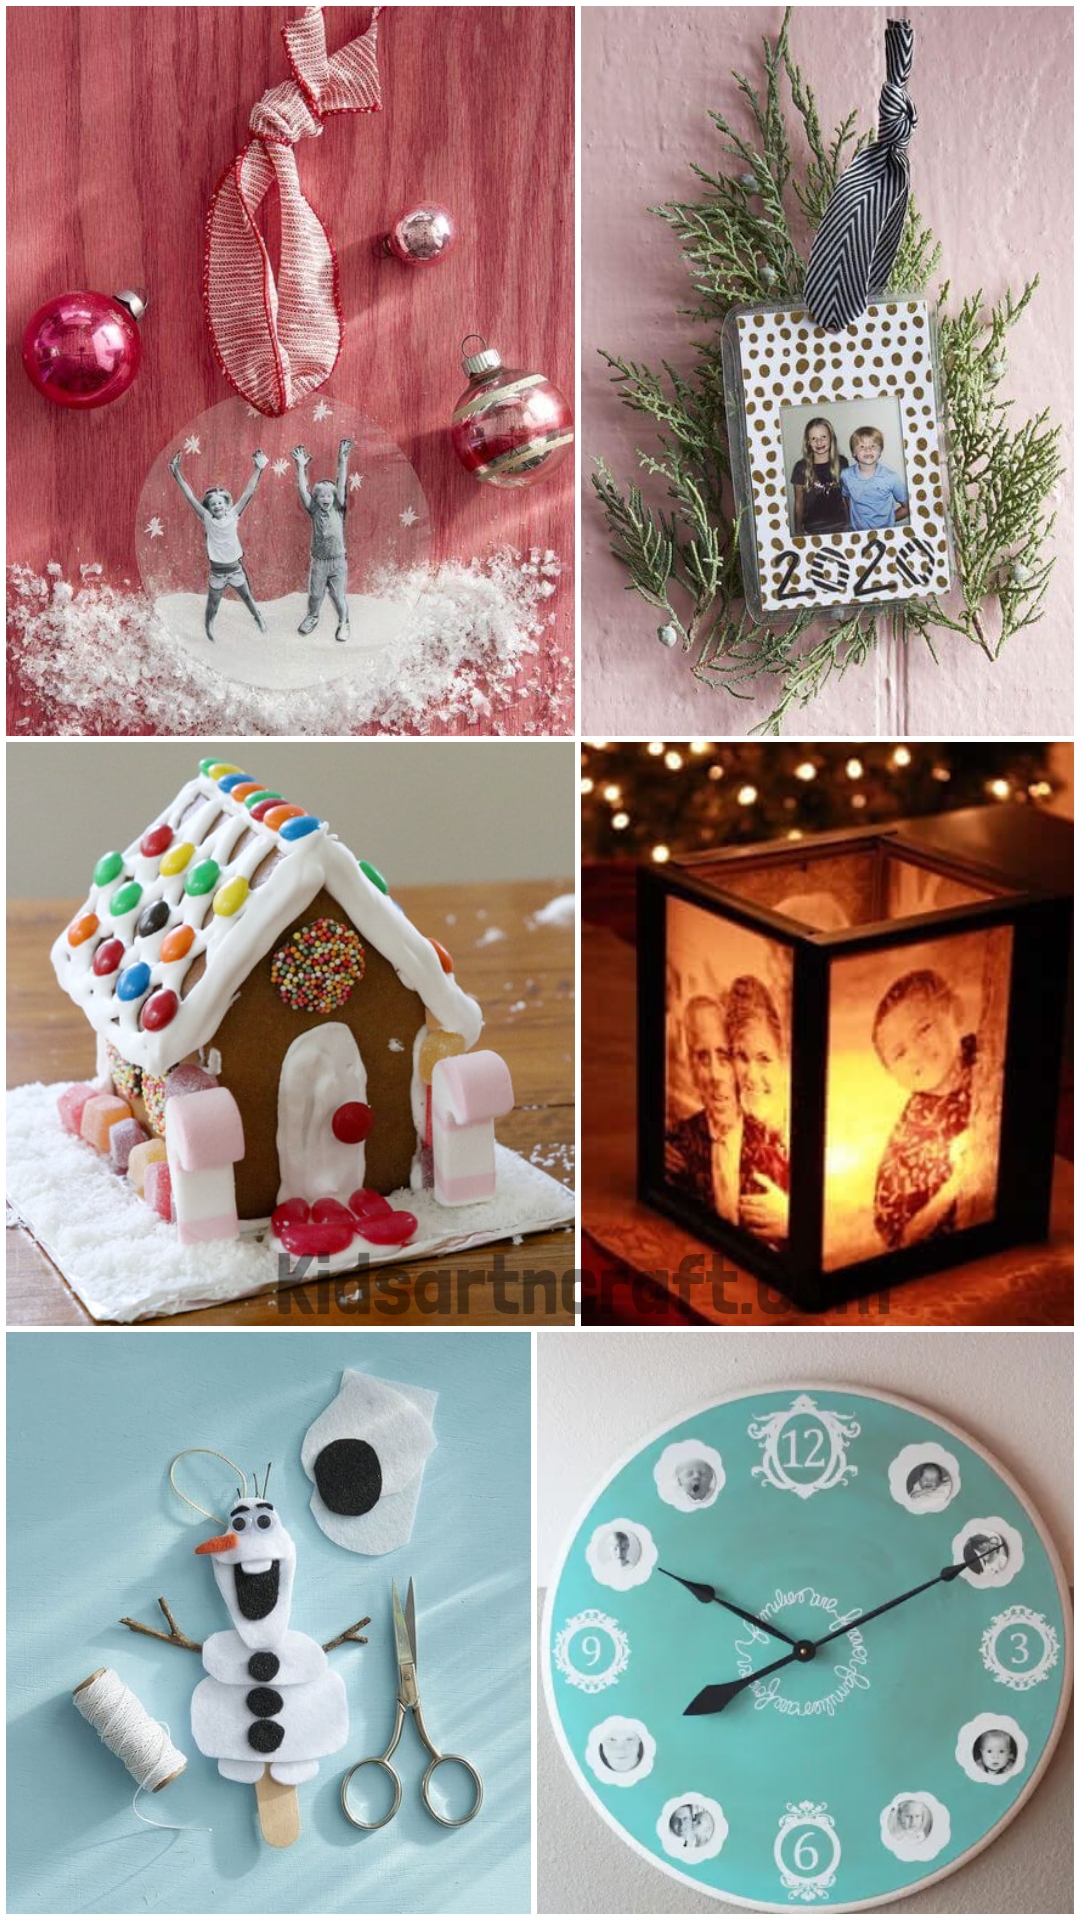 DIY Handmade Christmas Gifts to Make for Friends and Family